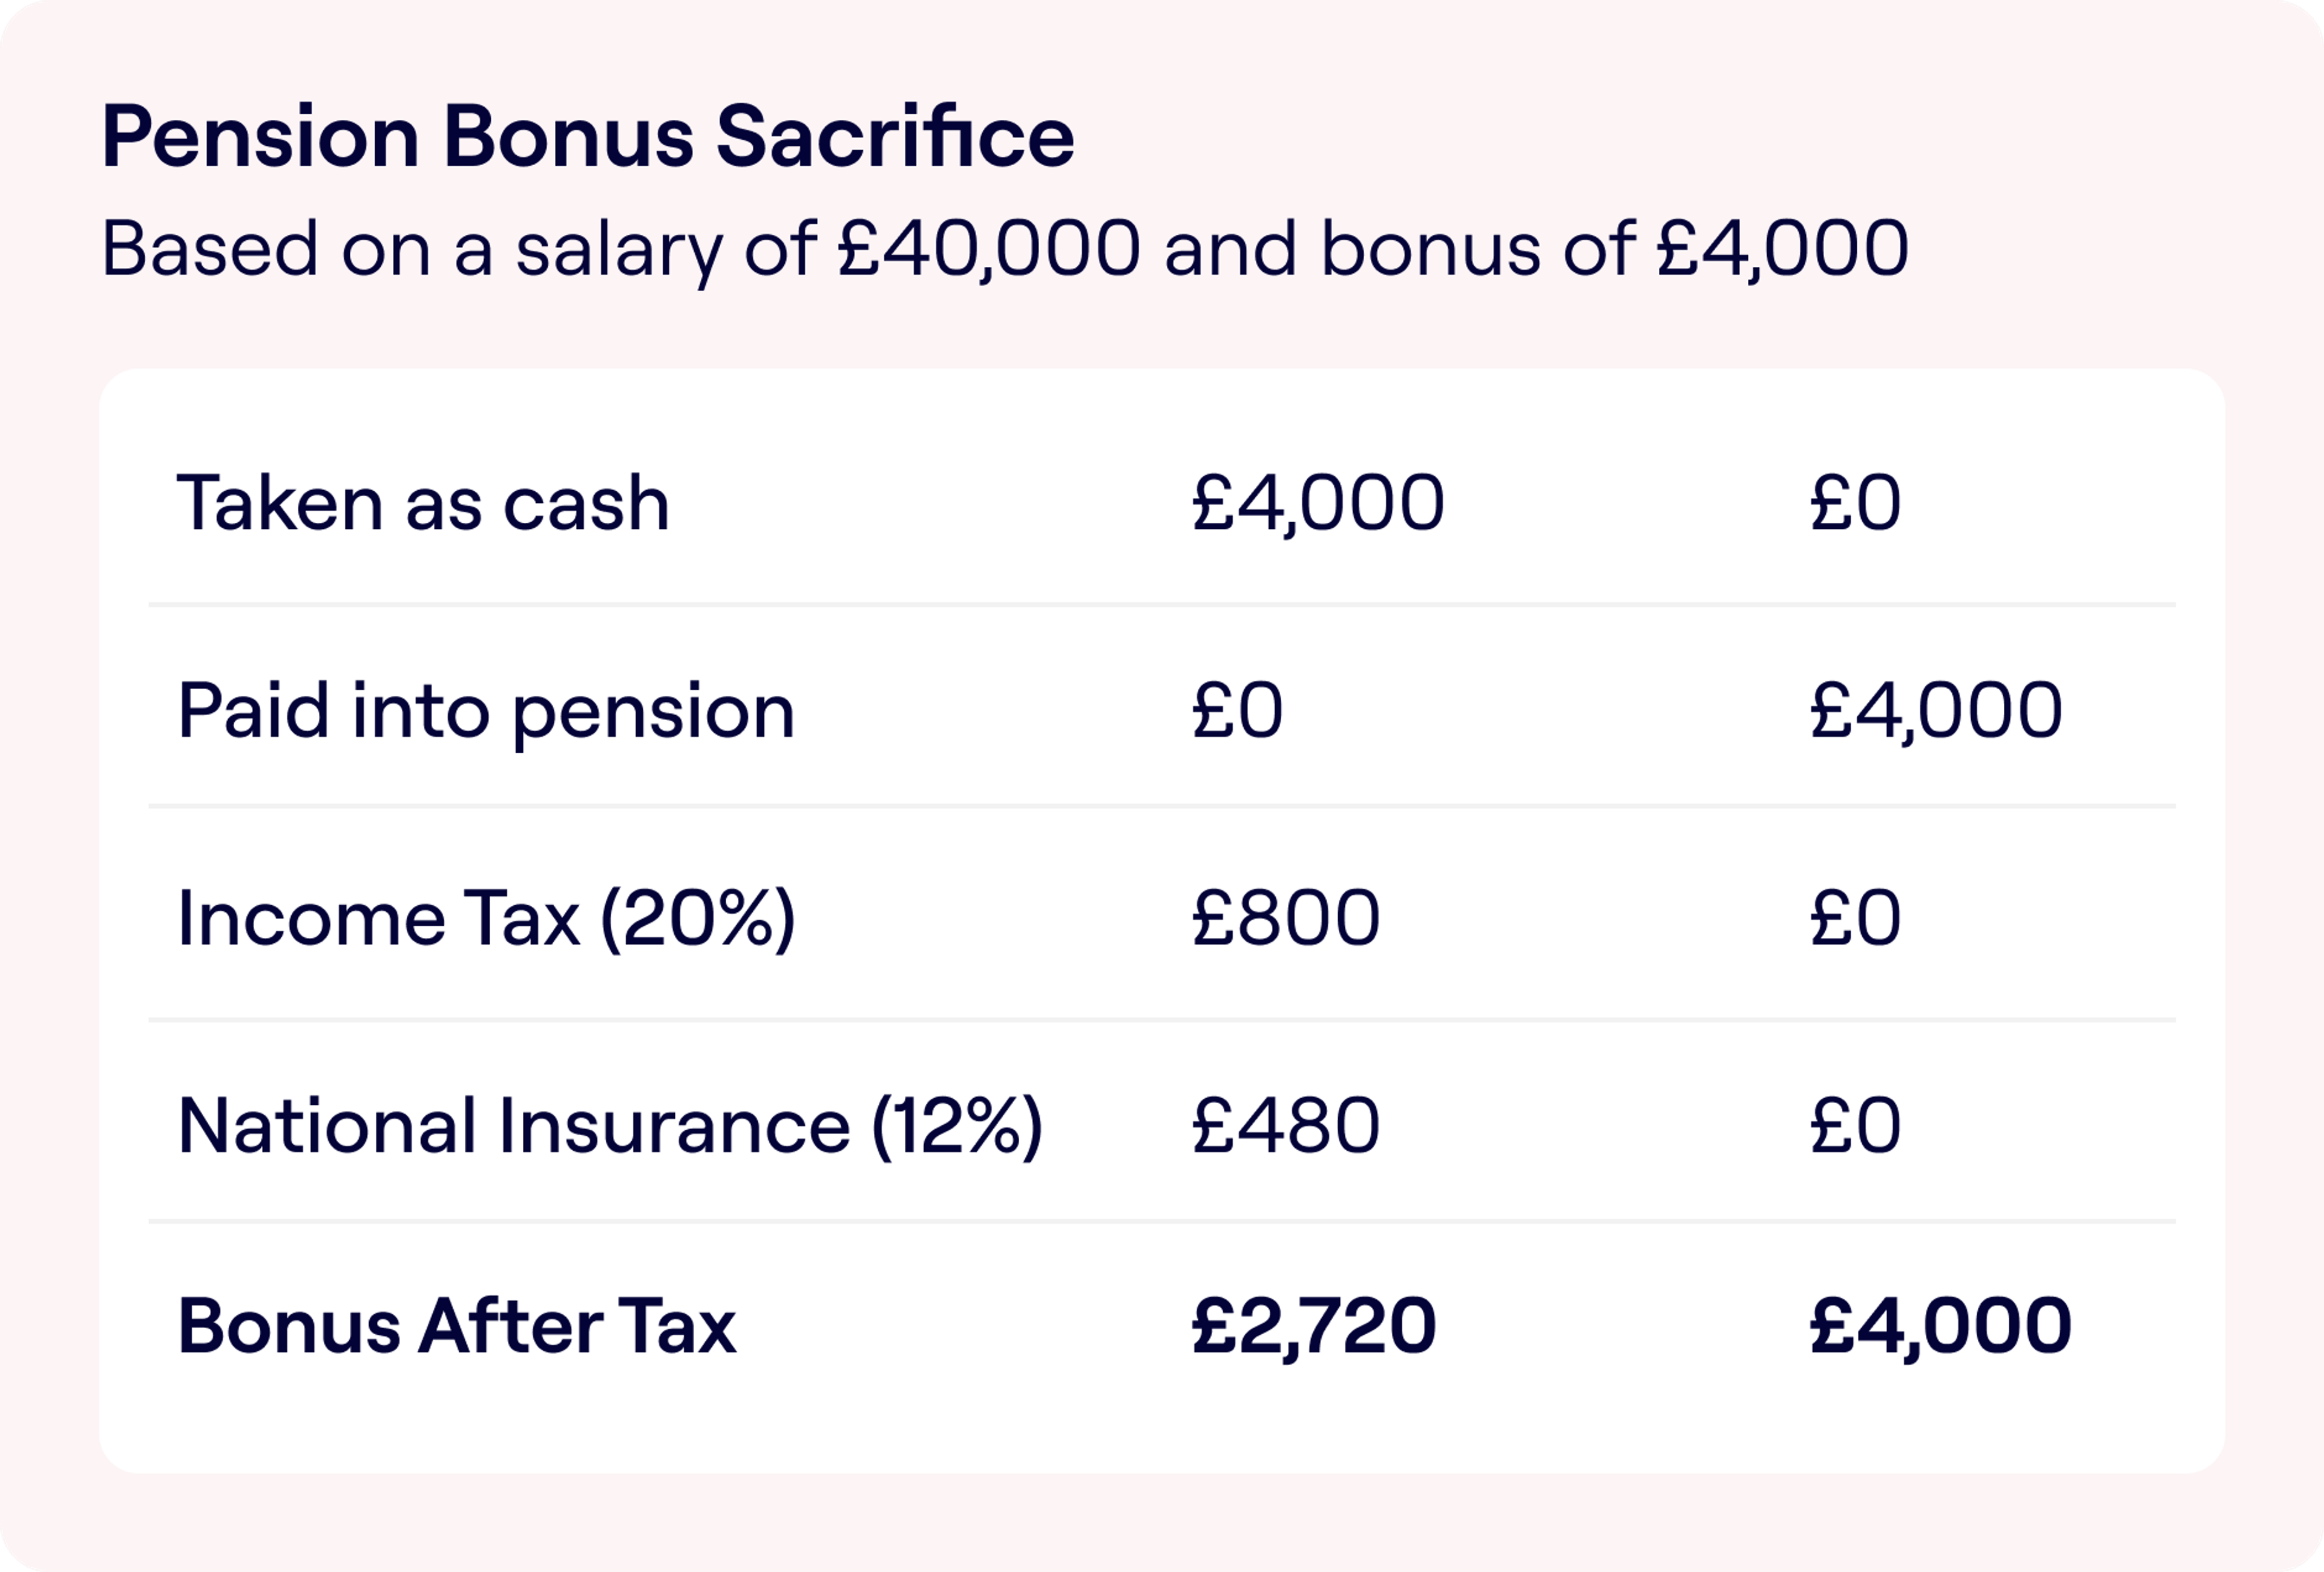 A financial comparison table titled 'Pension Bonus Sacrifice' based on a salary of £40,000 and a bonus of £4,000. It shows two columns for 'Taken as cash' and 'Paid into pension.' Under 'Taken as cash,' it lists £4,000 with subsequent deductions for Income Tax at 20% (£800) and National Insurance at 12% (£480), resulting in a 'Bonus After Tax' of £2,720. The 'Paid into pension' column shows £0 taken as cash, £4,000 paid into pension with no income tax or national insurance deducted, resulting in a 'Bonus After Tax' of £4,000.